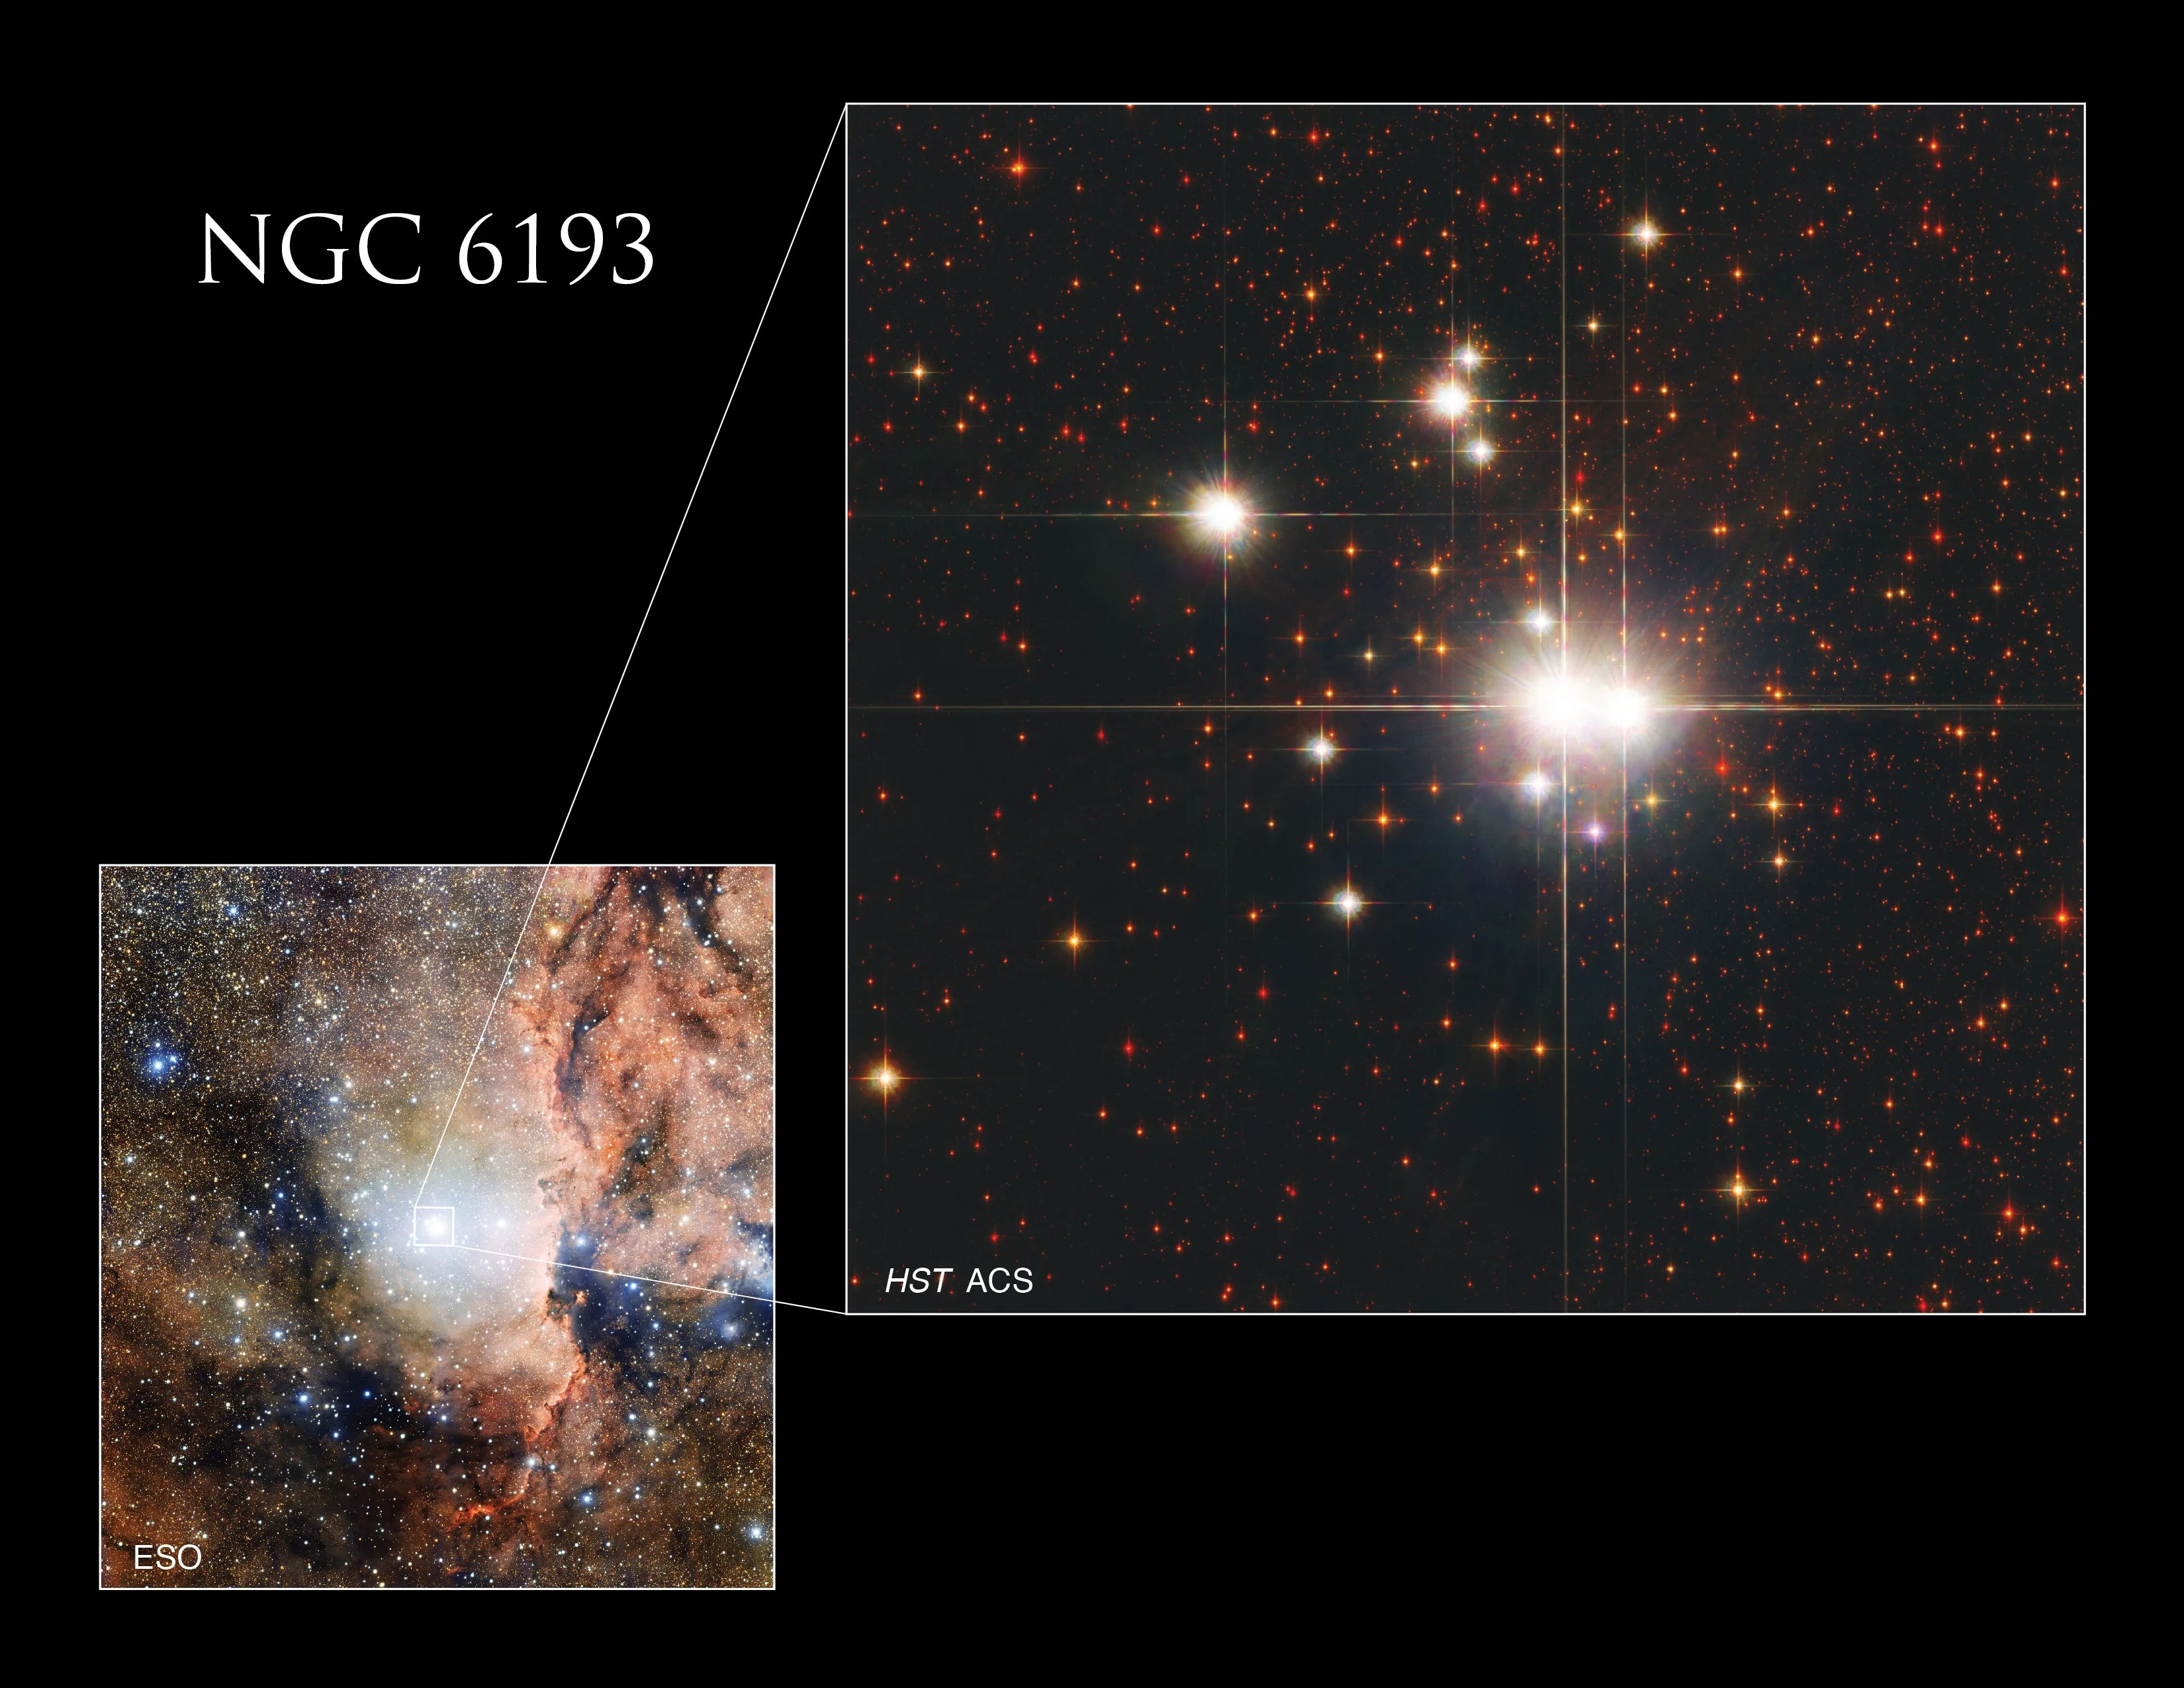 On the left is a ground-based image from a telescope at the European Southern Observatory (ESO), showing clouds of reddish gas and dark dust with a bright but indistinct haze of stars at their center. On the right is Hubble's image of several bright whitish stars surrounded to dimmer red stars.